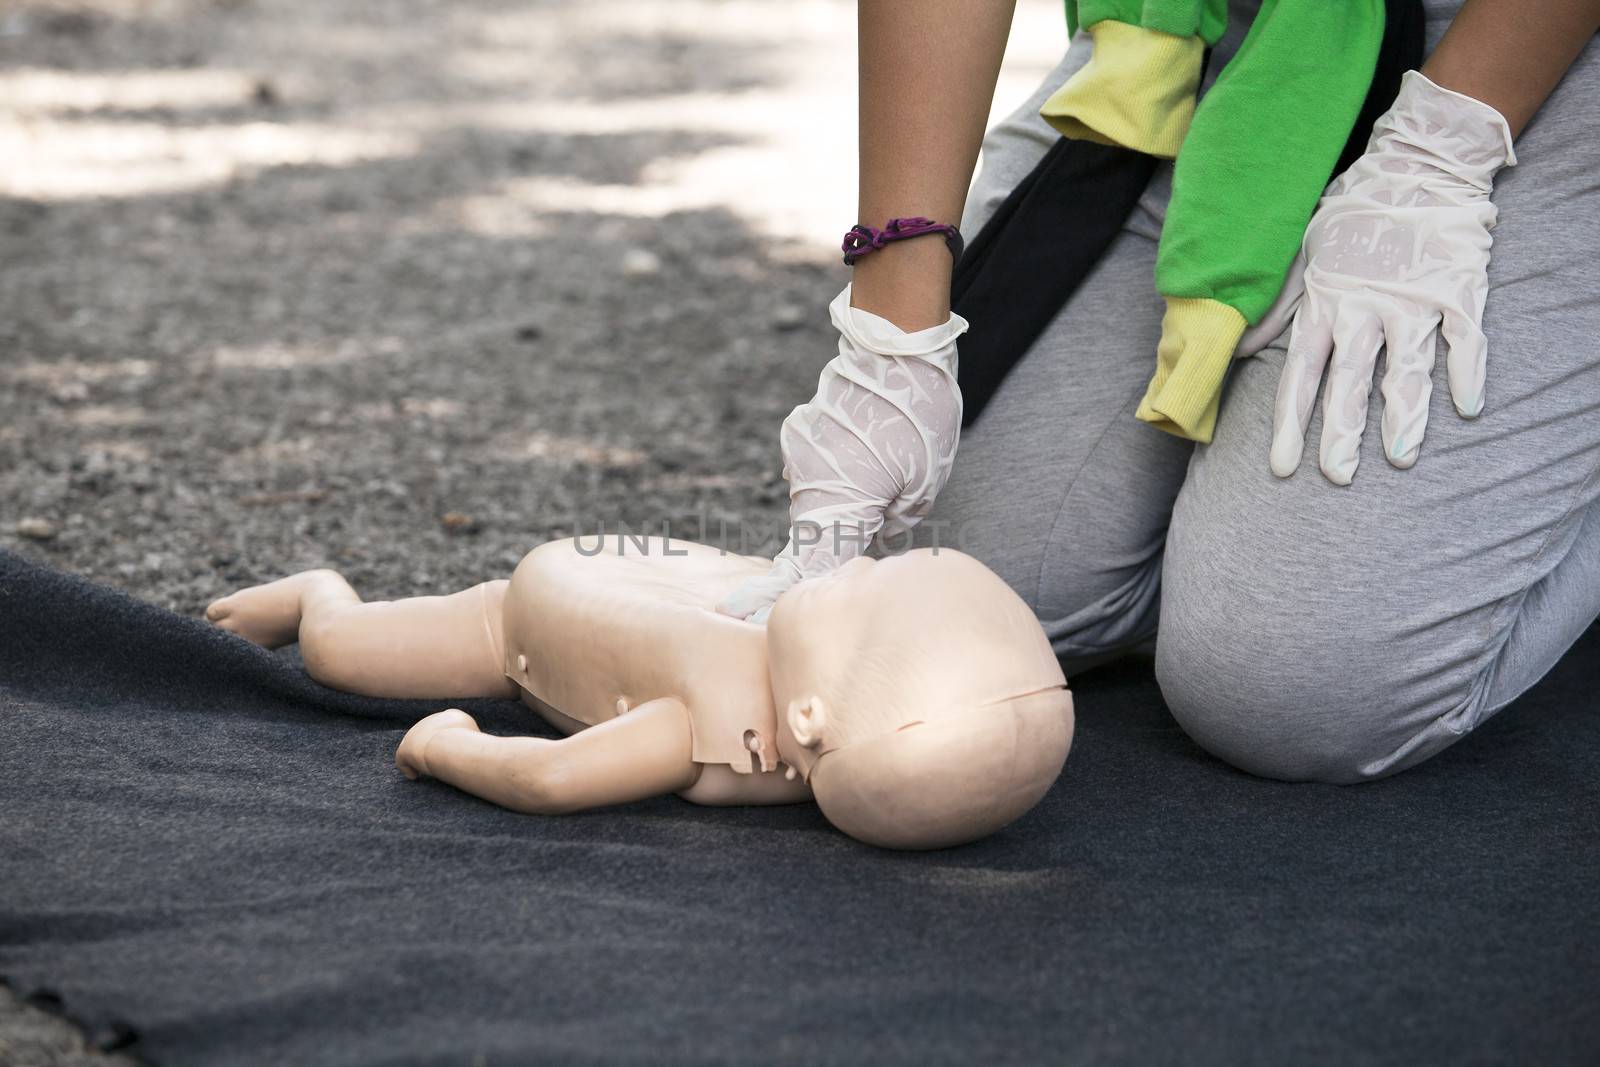 Paramedic demonstrates CPR on infant dummy